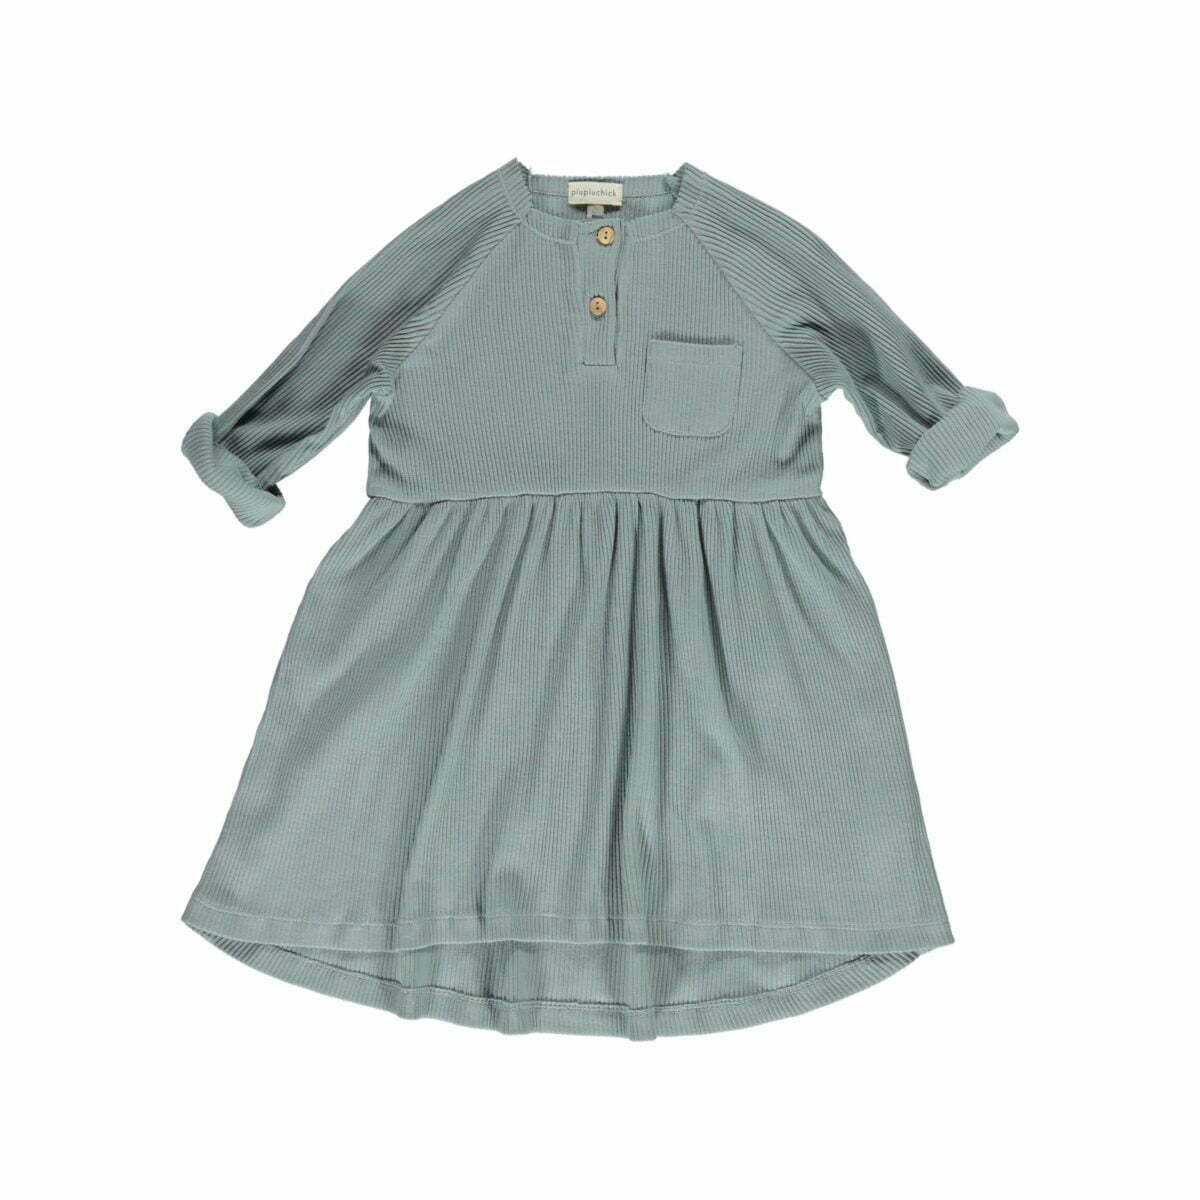 ribbed dress whashed blue kid piupiuchick a scaled